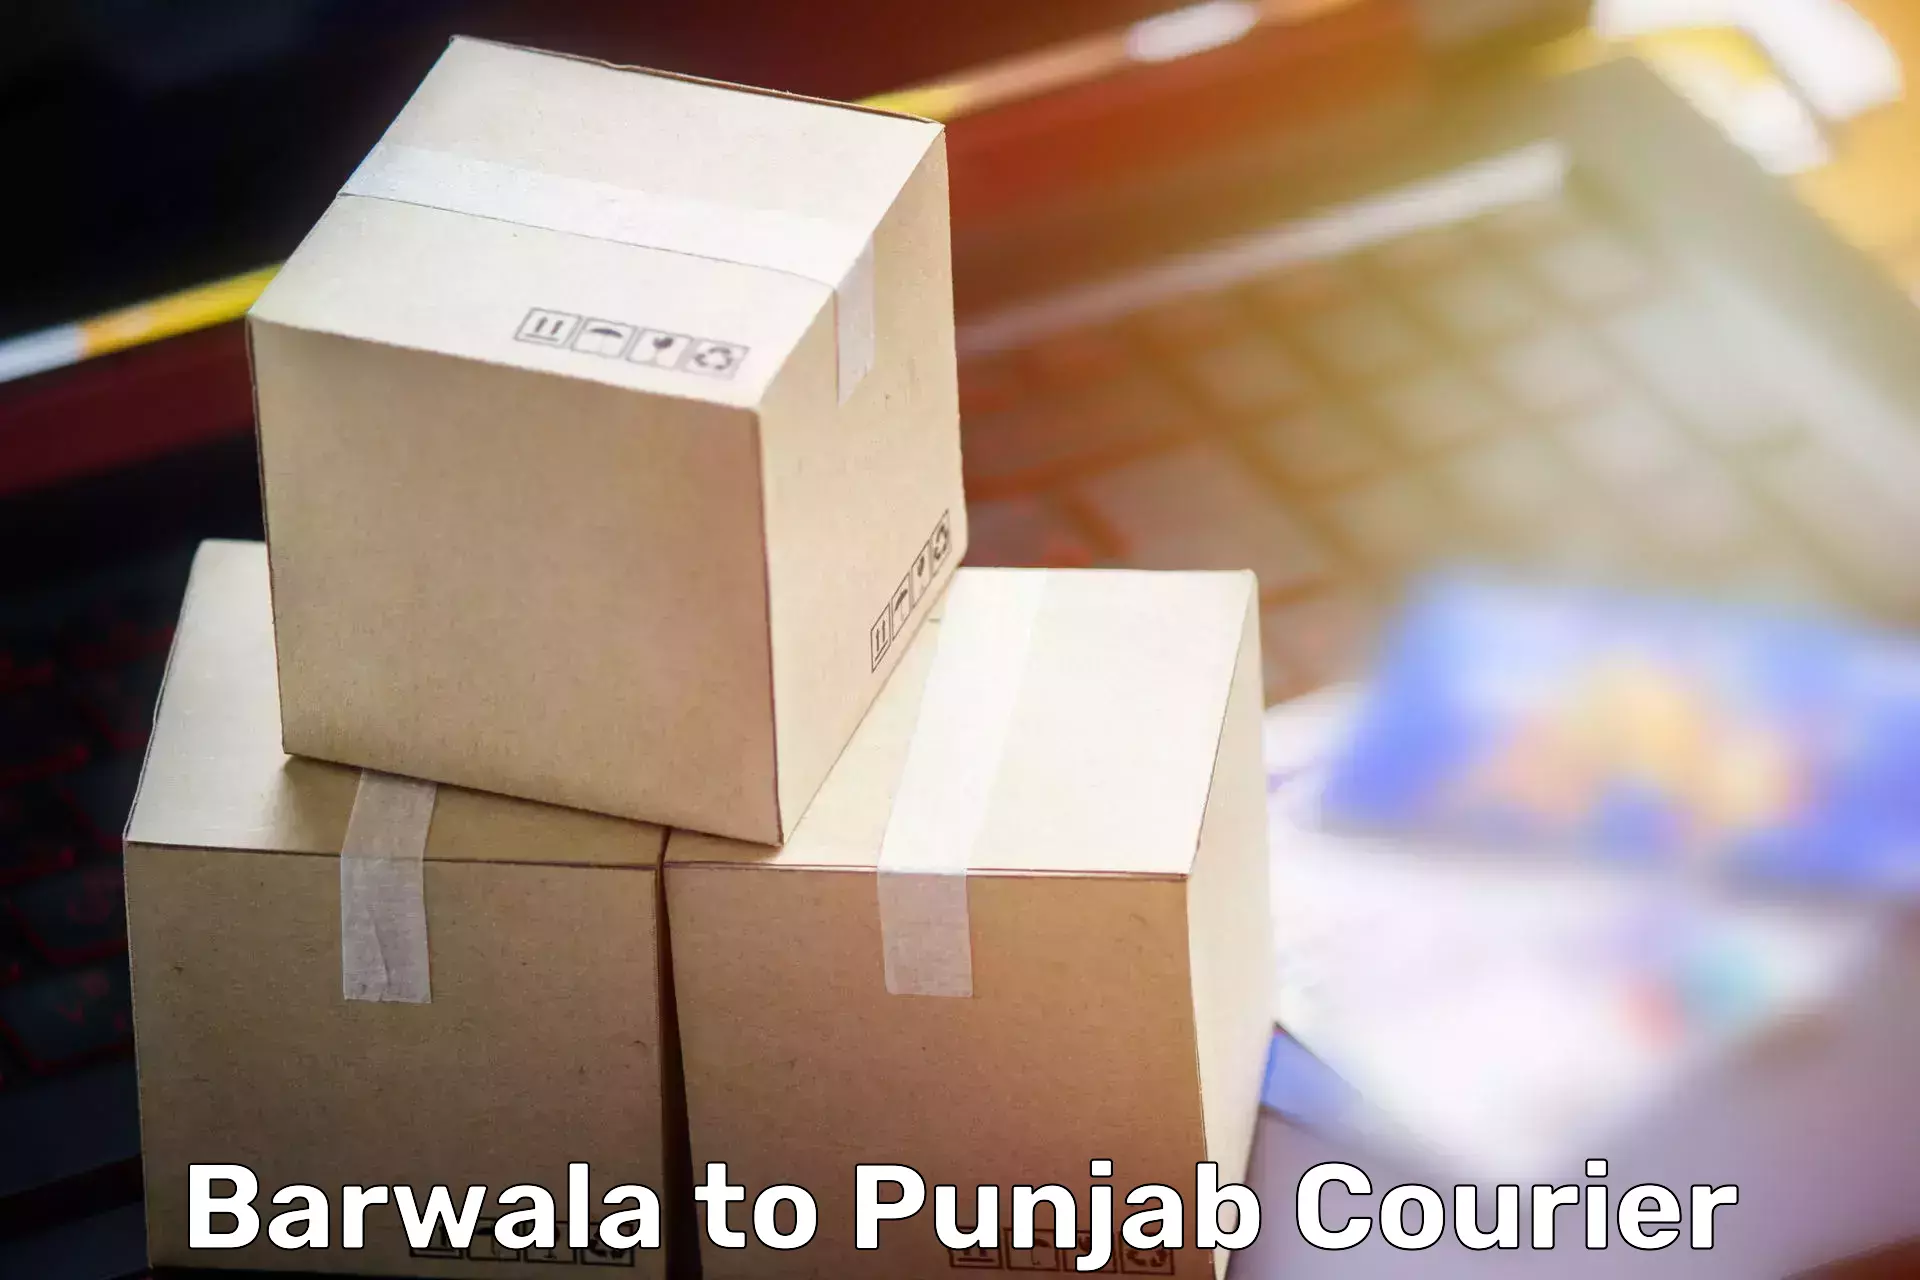 Efficient relocation services Barwala to Abohar